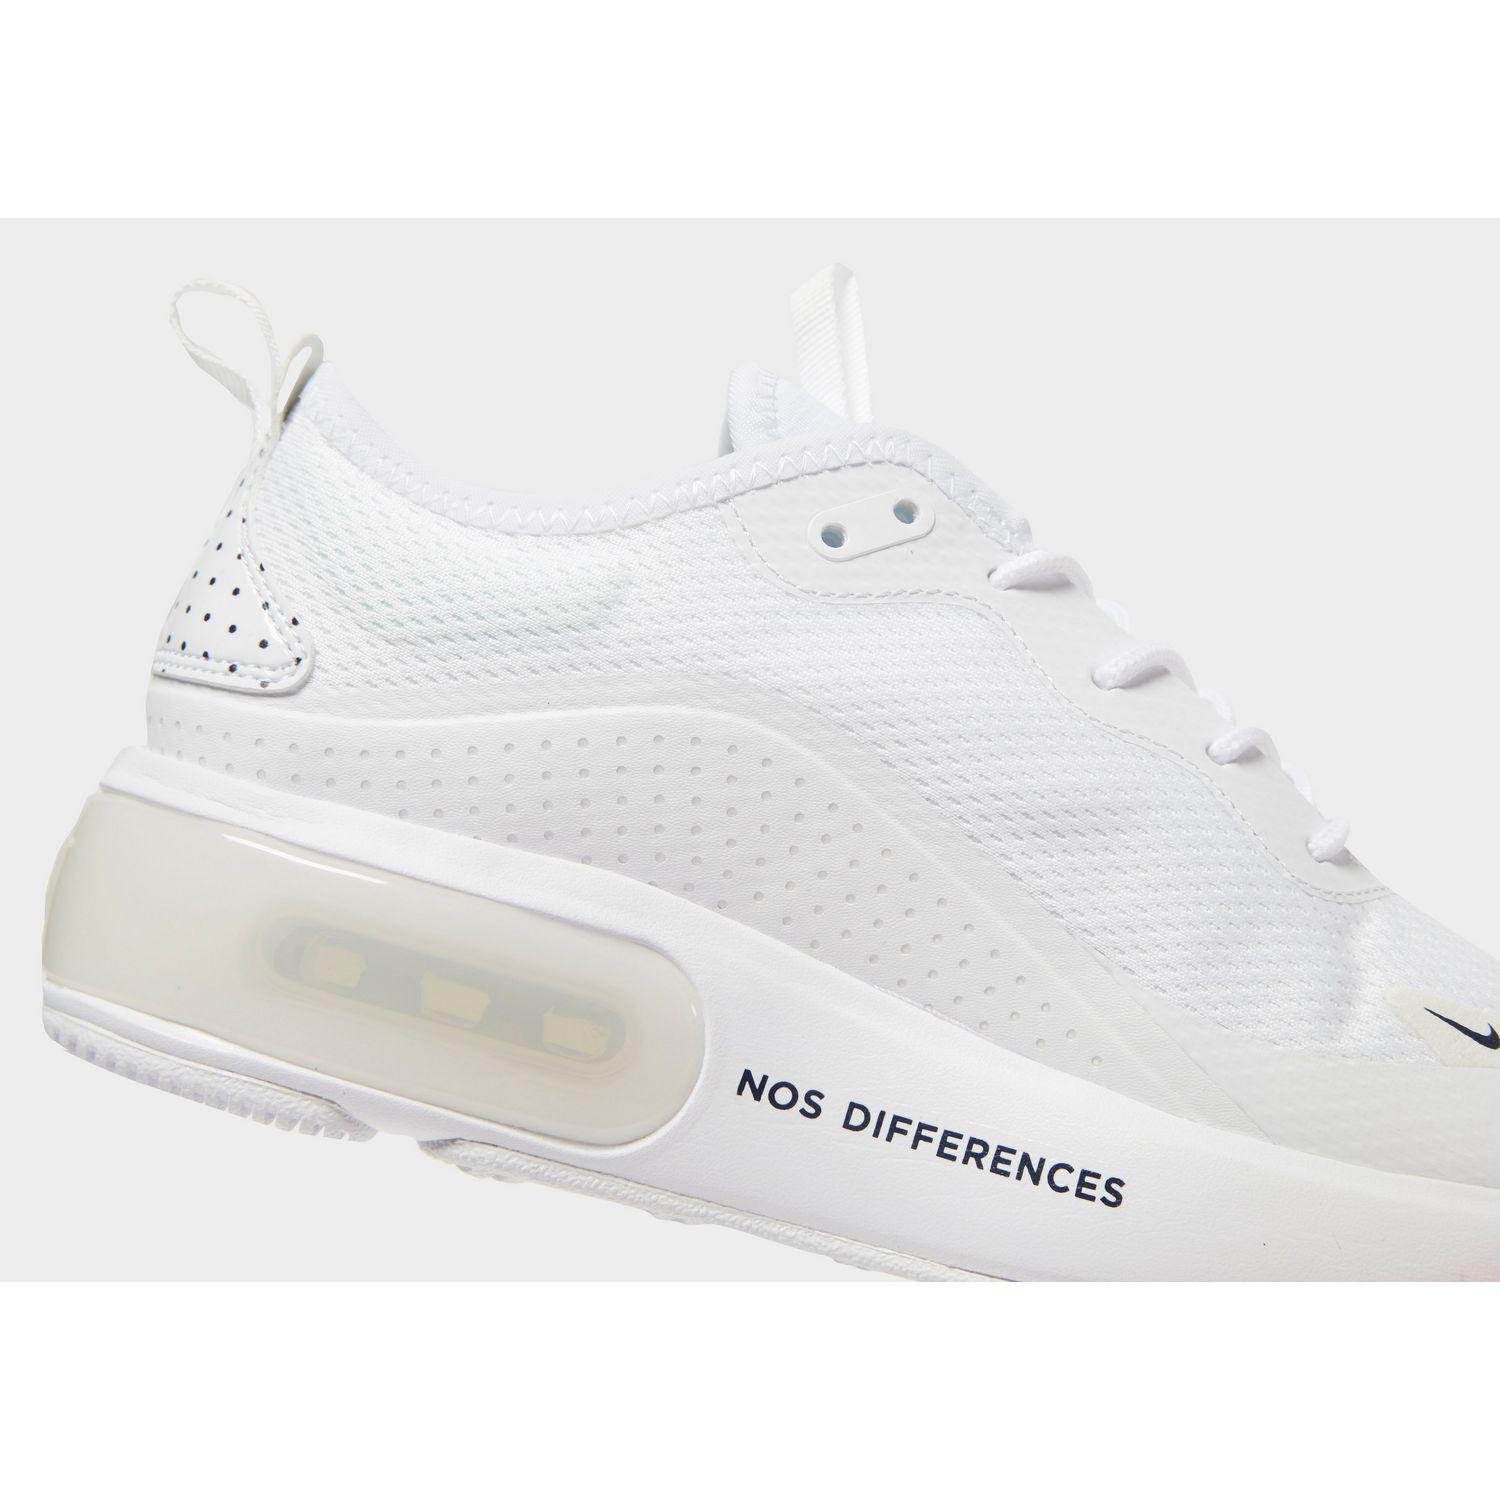 Nike Synthetic Air Max Dia Unite Totale in White - Lyst